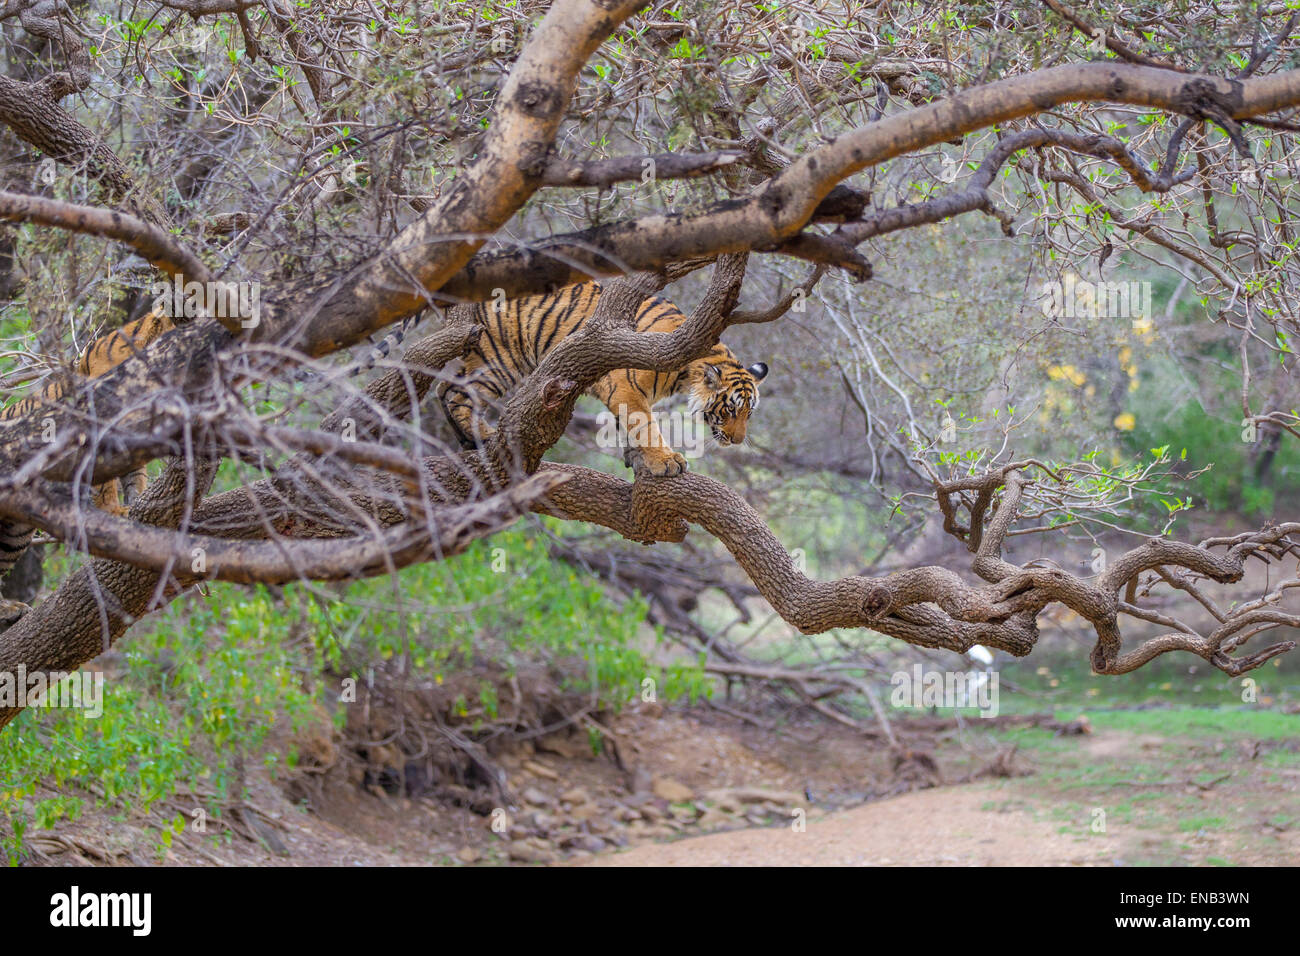 A Bengal Tiger siblings around 13 months old climbing on a tree, at Ranthambhore Forest, india. [Panthera Tigris] Stock Photo